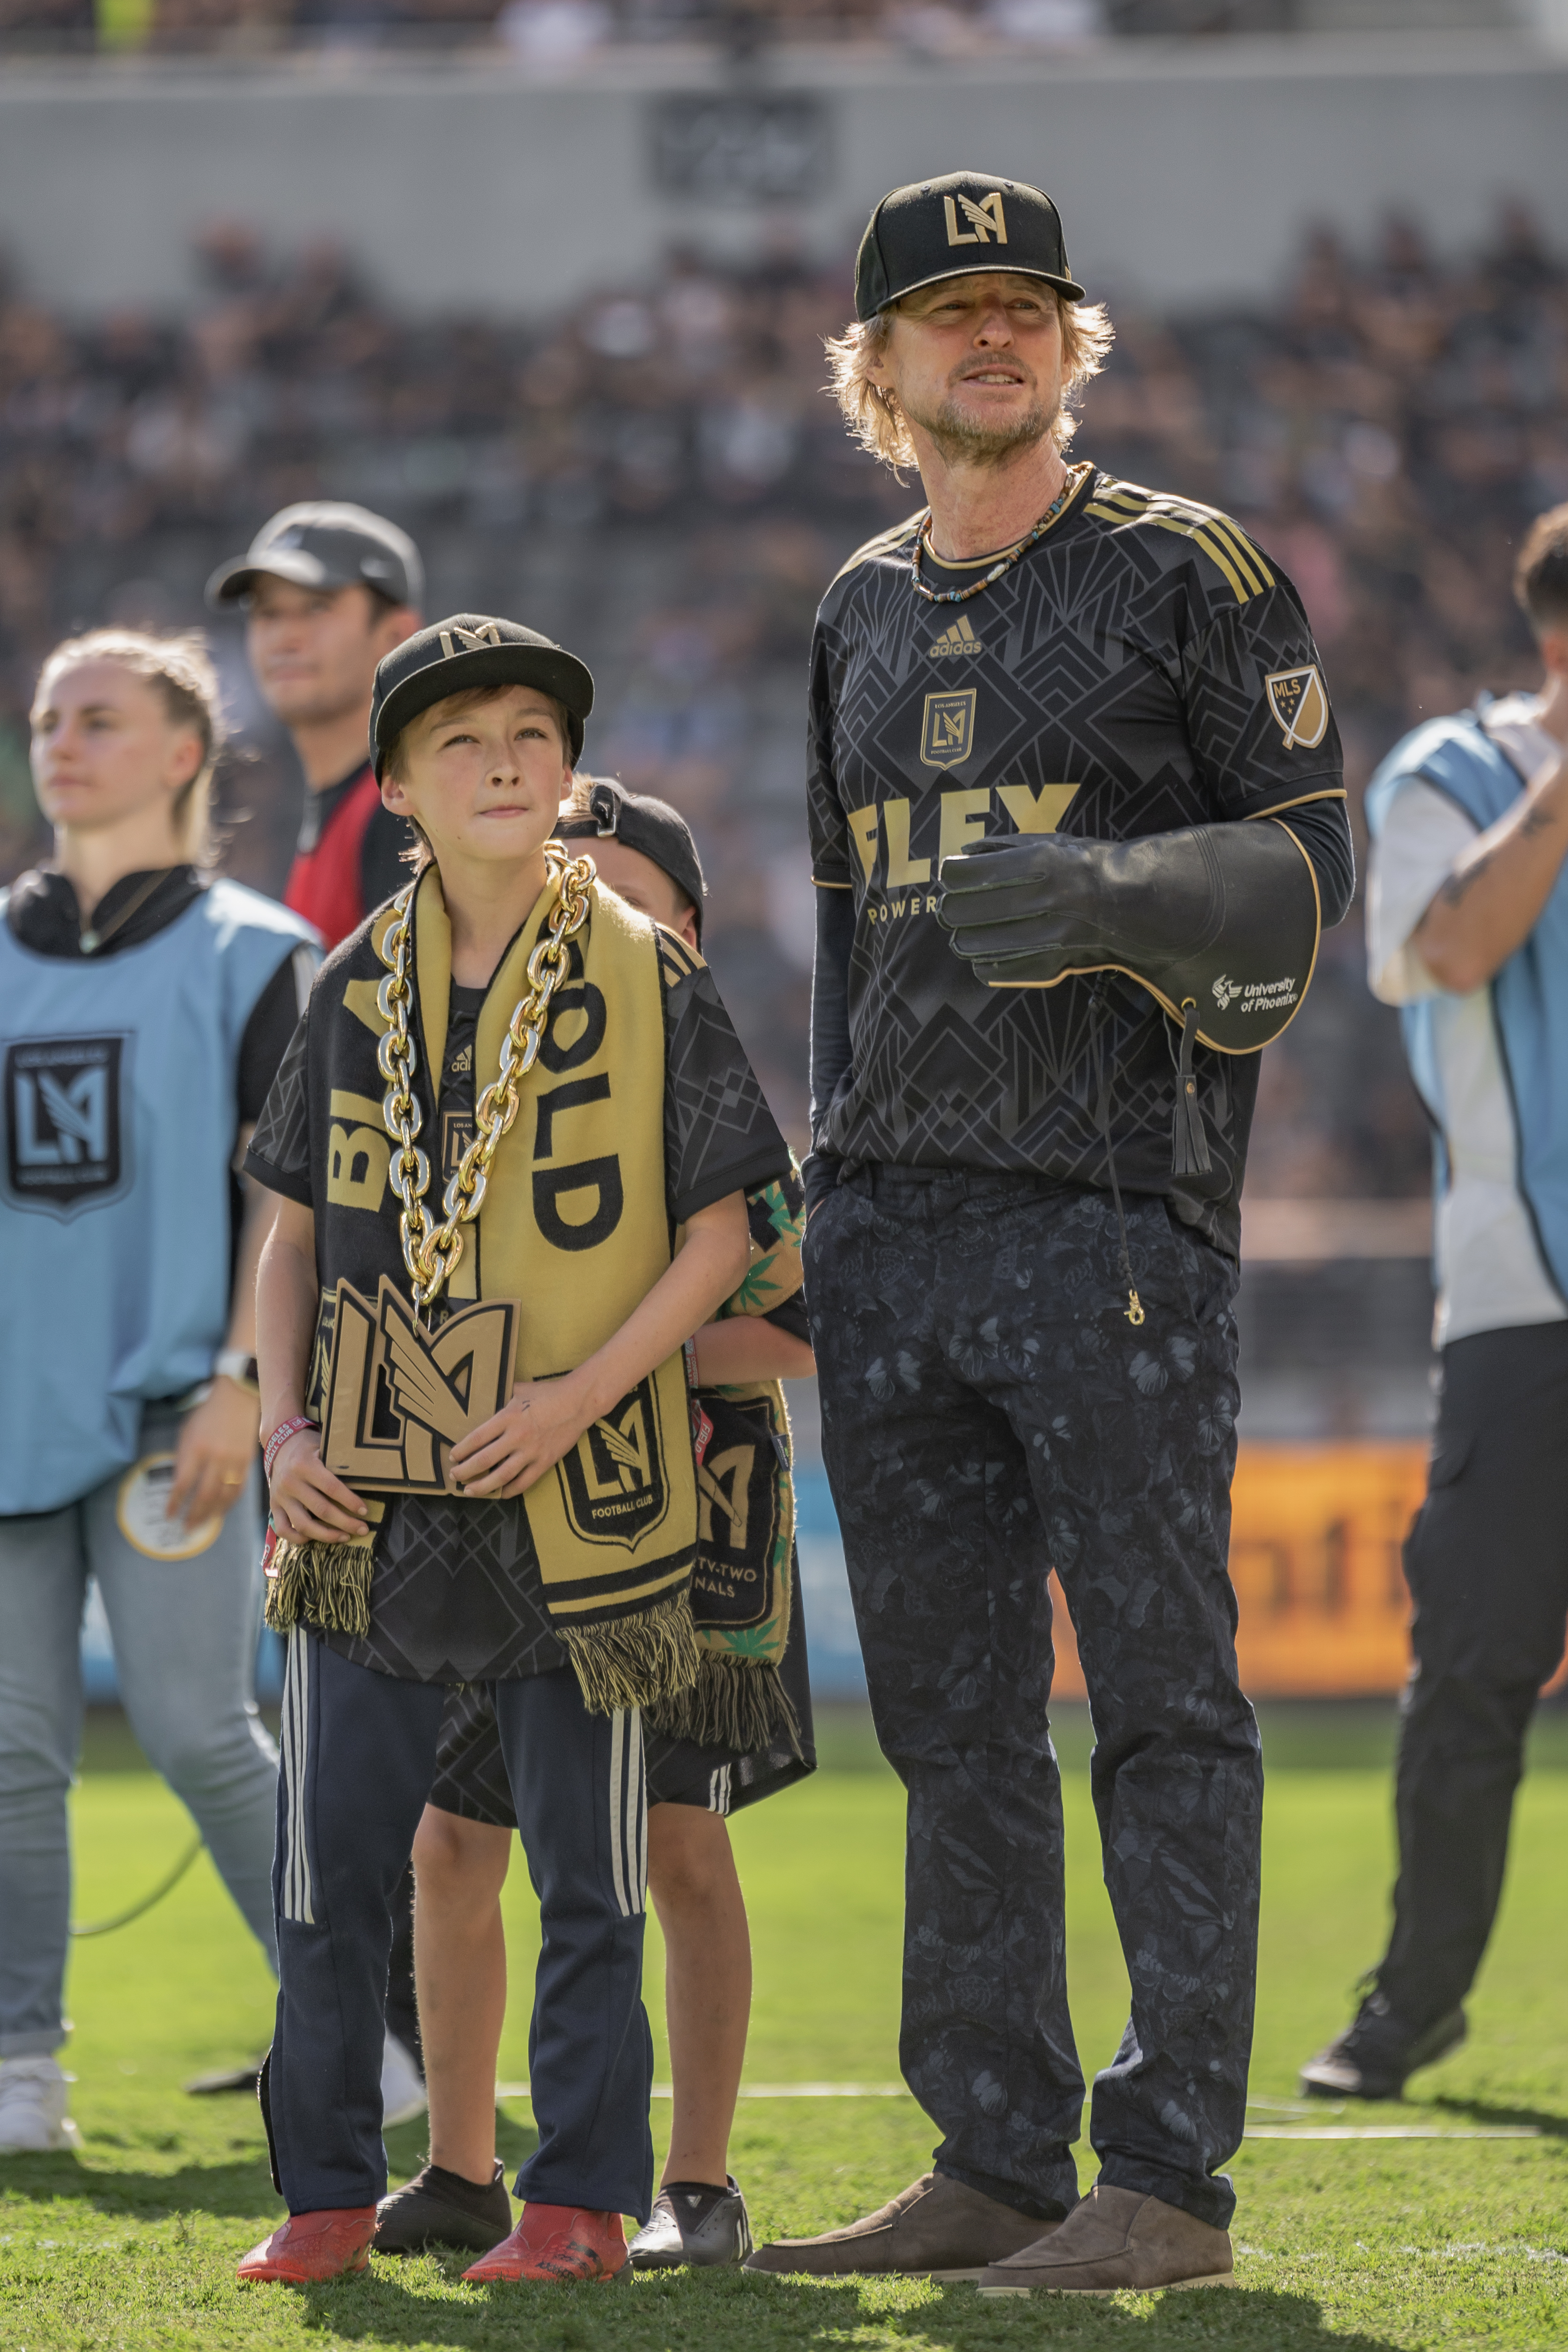 Owen Wilson and his son Ford watch a falcon fly during a game between Austin FC and Los Angeles FC on October 29, 2022, in Los Angeles, California. | Source: Getty Images